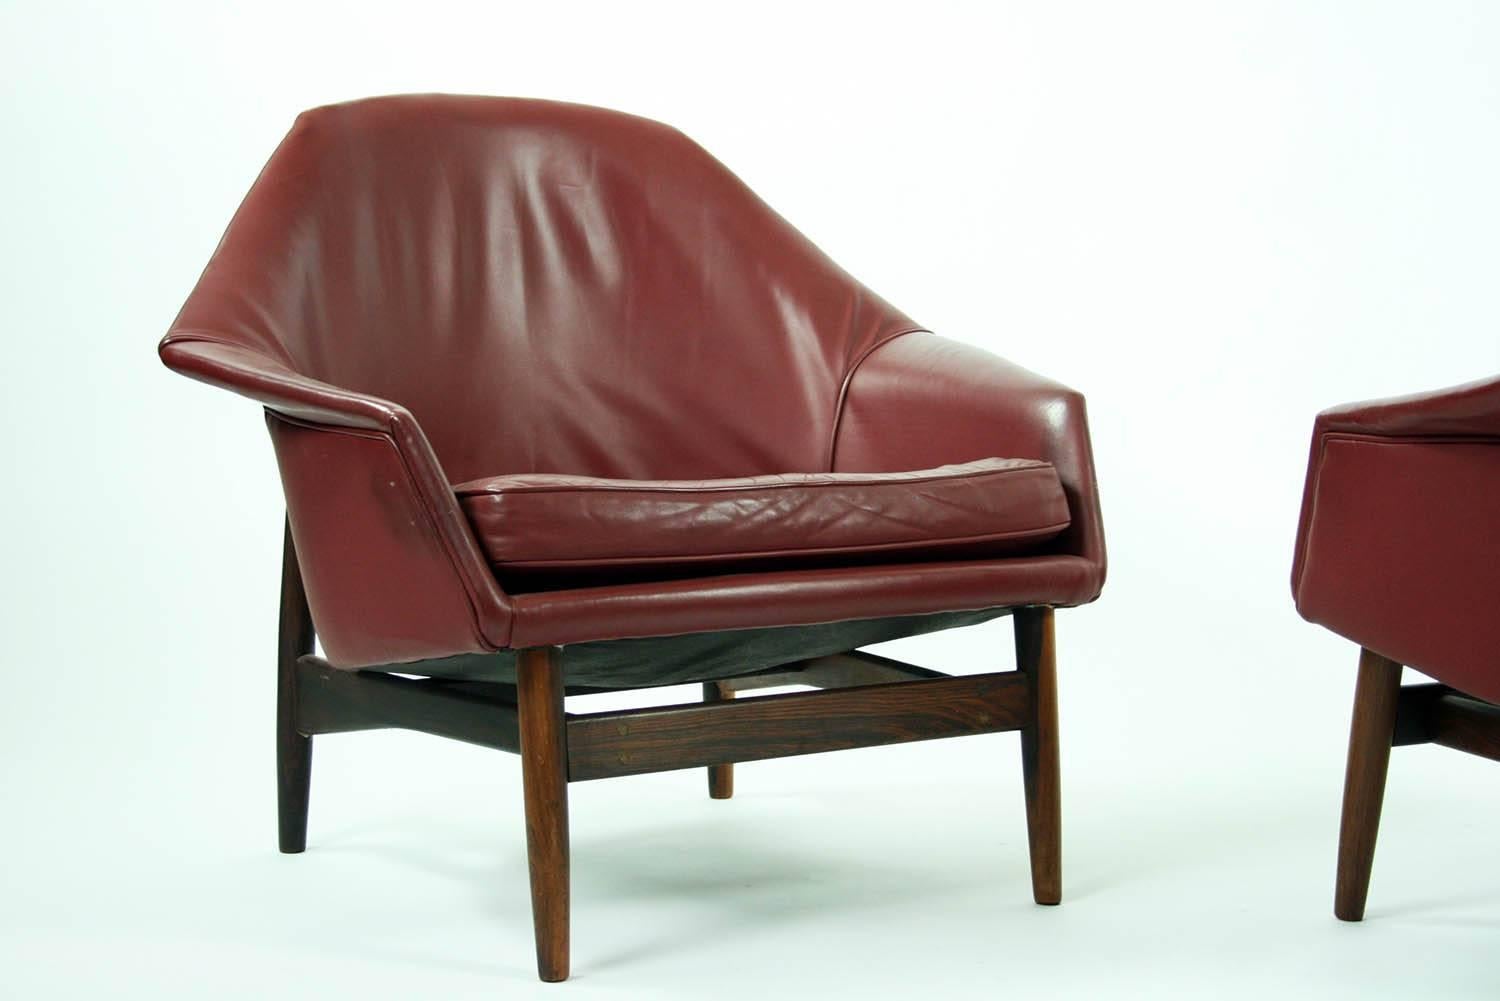 Mid-20th Century Pair of Rosewood and Leather Lounge Chairs by Ib Kofod Larsen for Carlo Gahrn